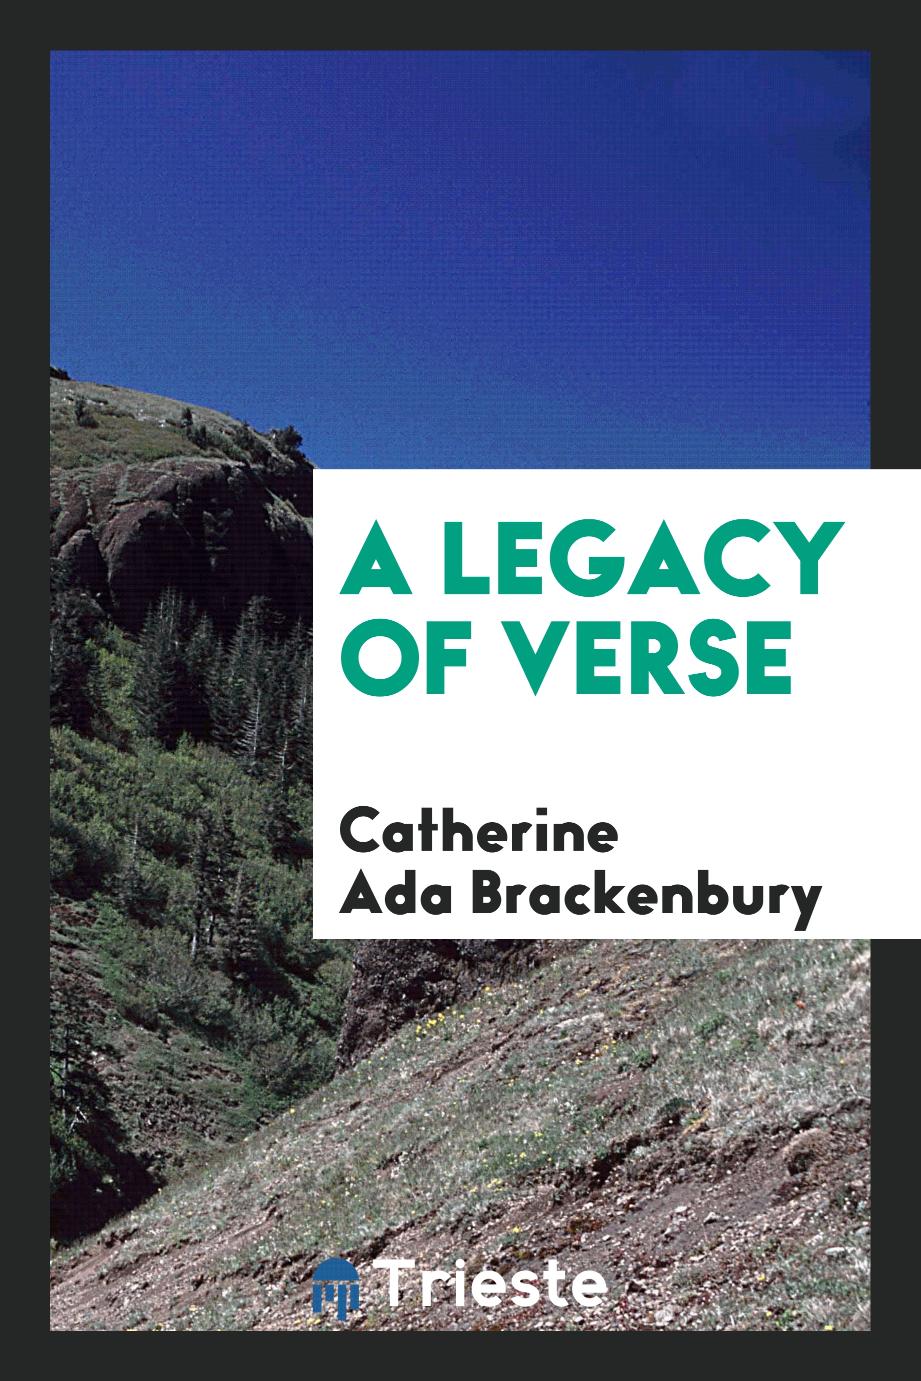 A Legacy of Verse